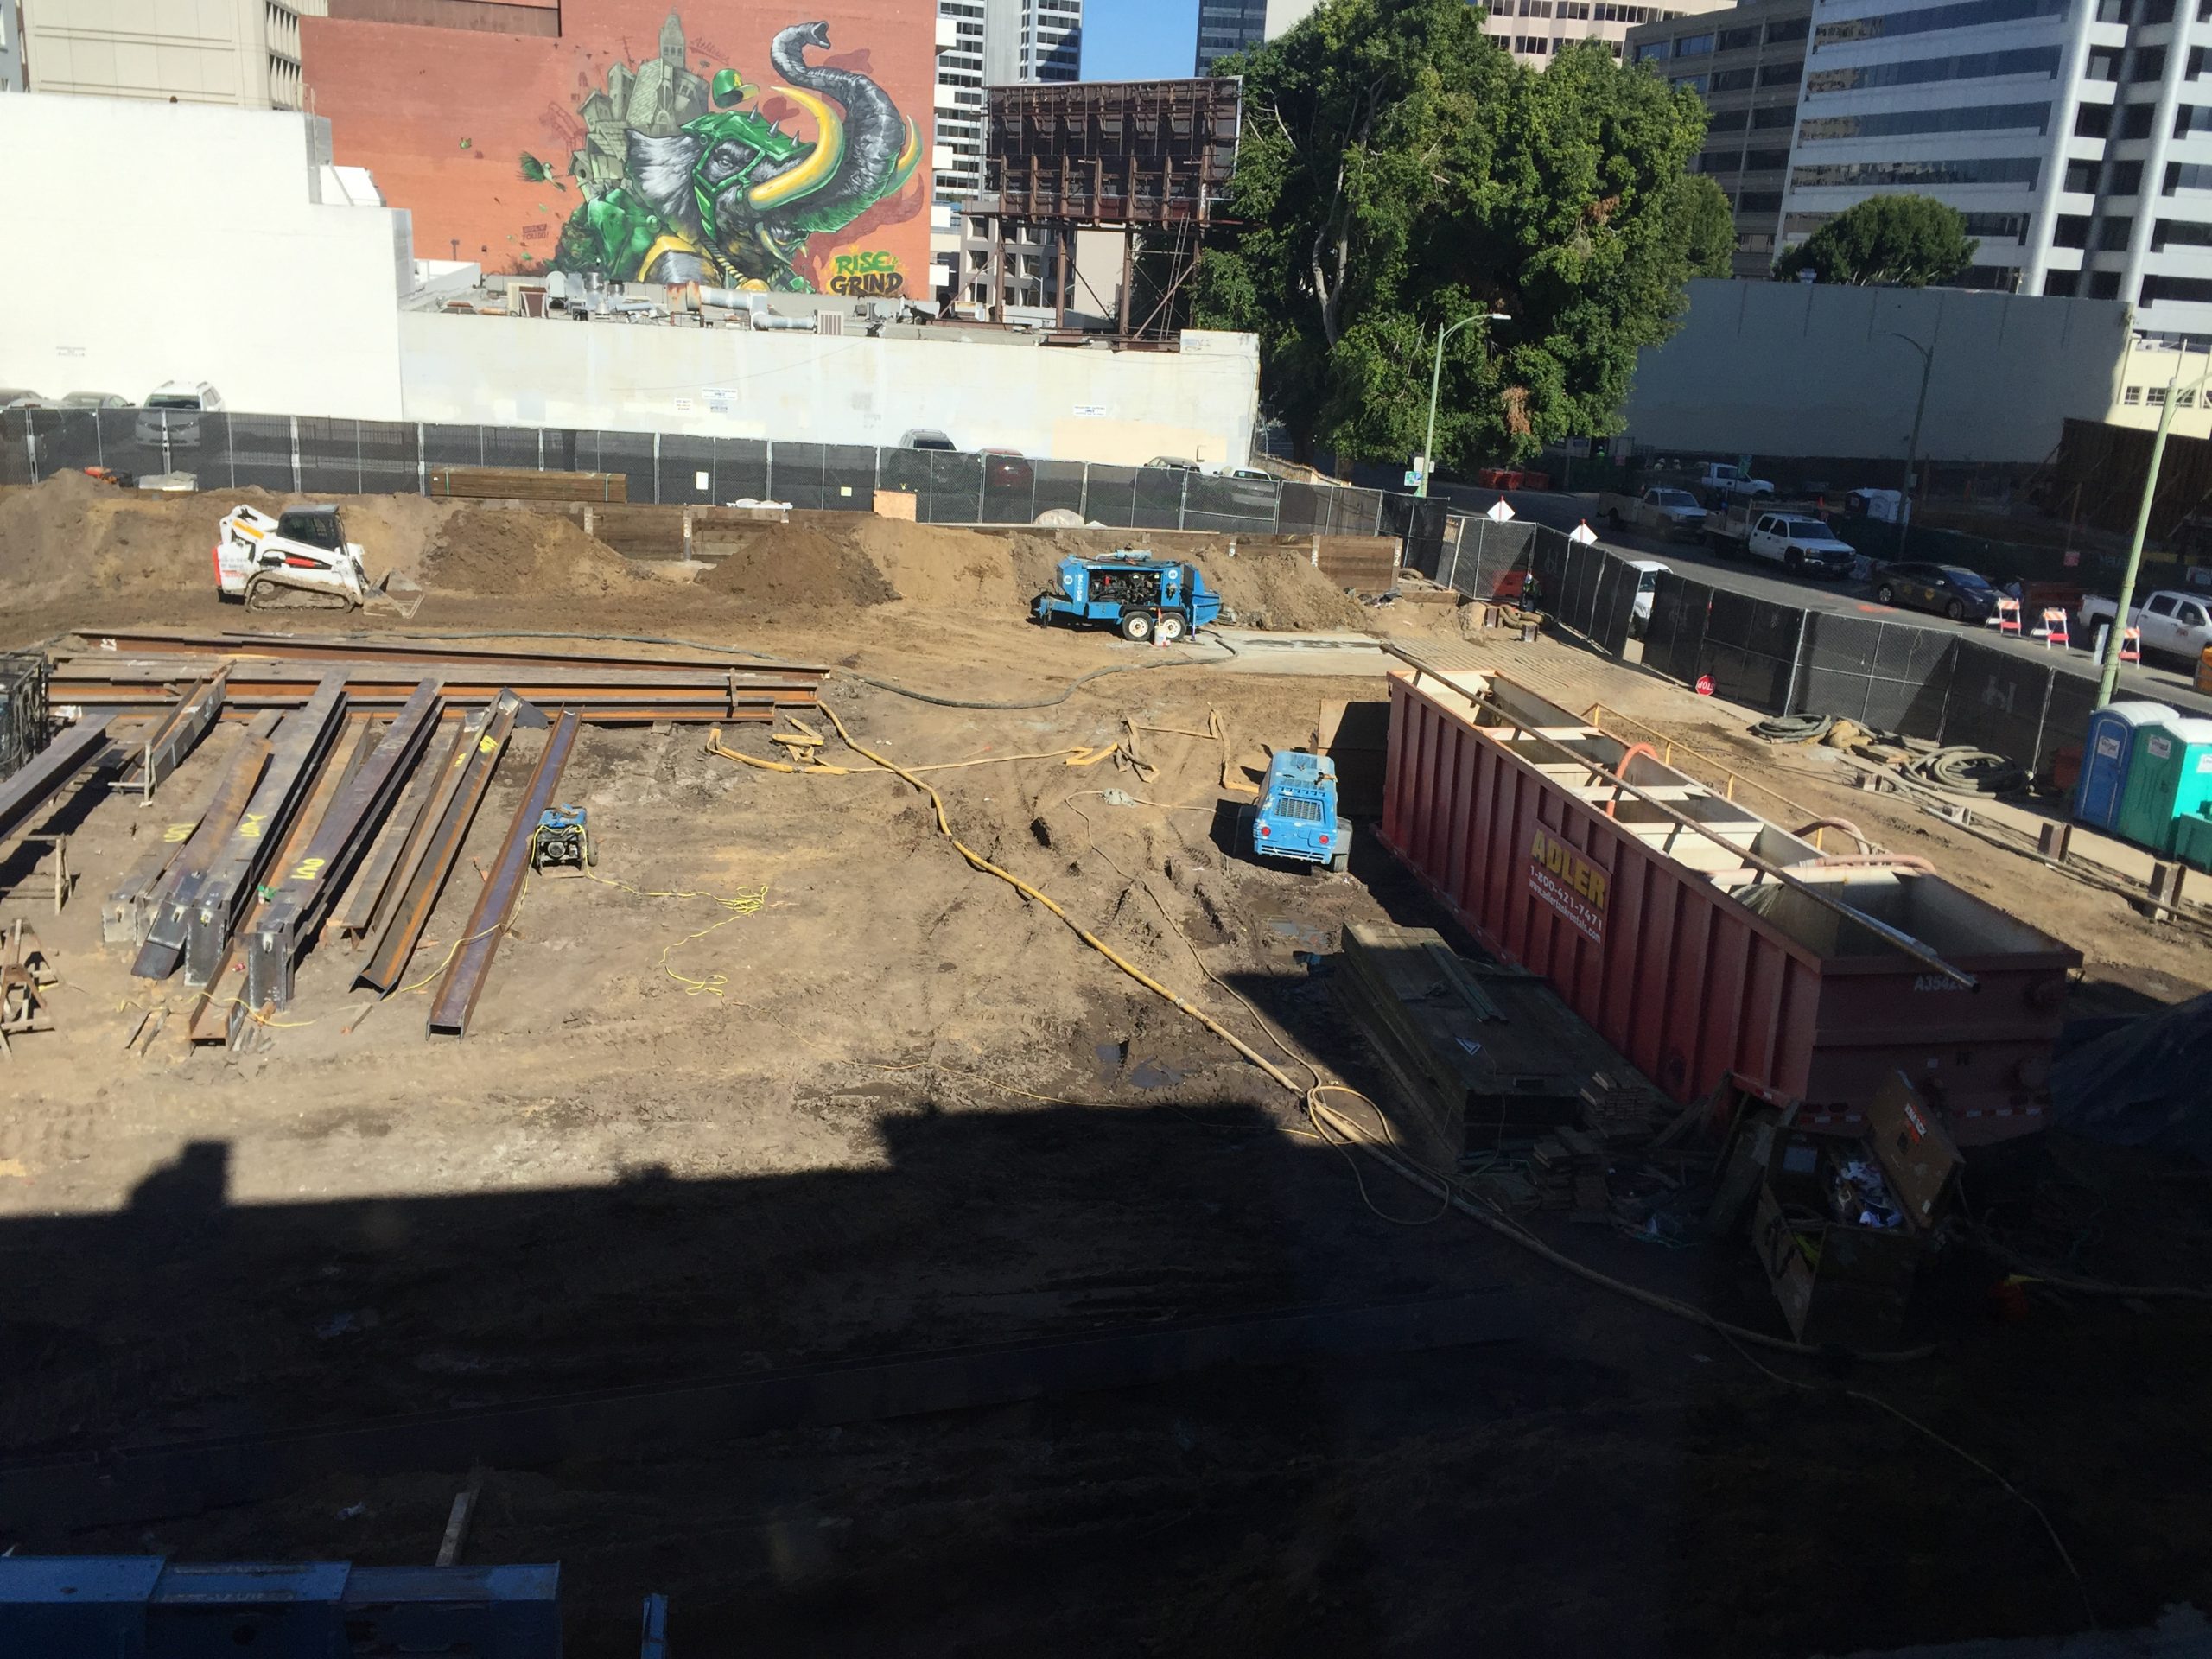 A construction zone for a new parking garage